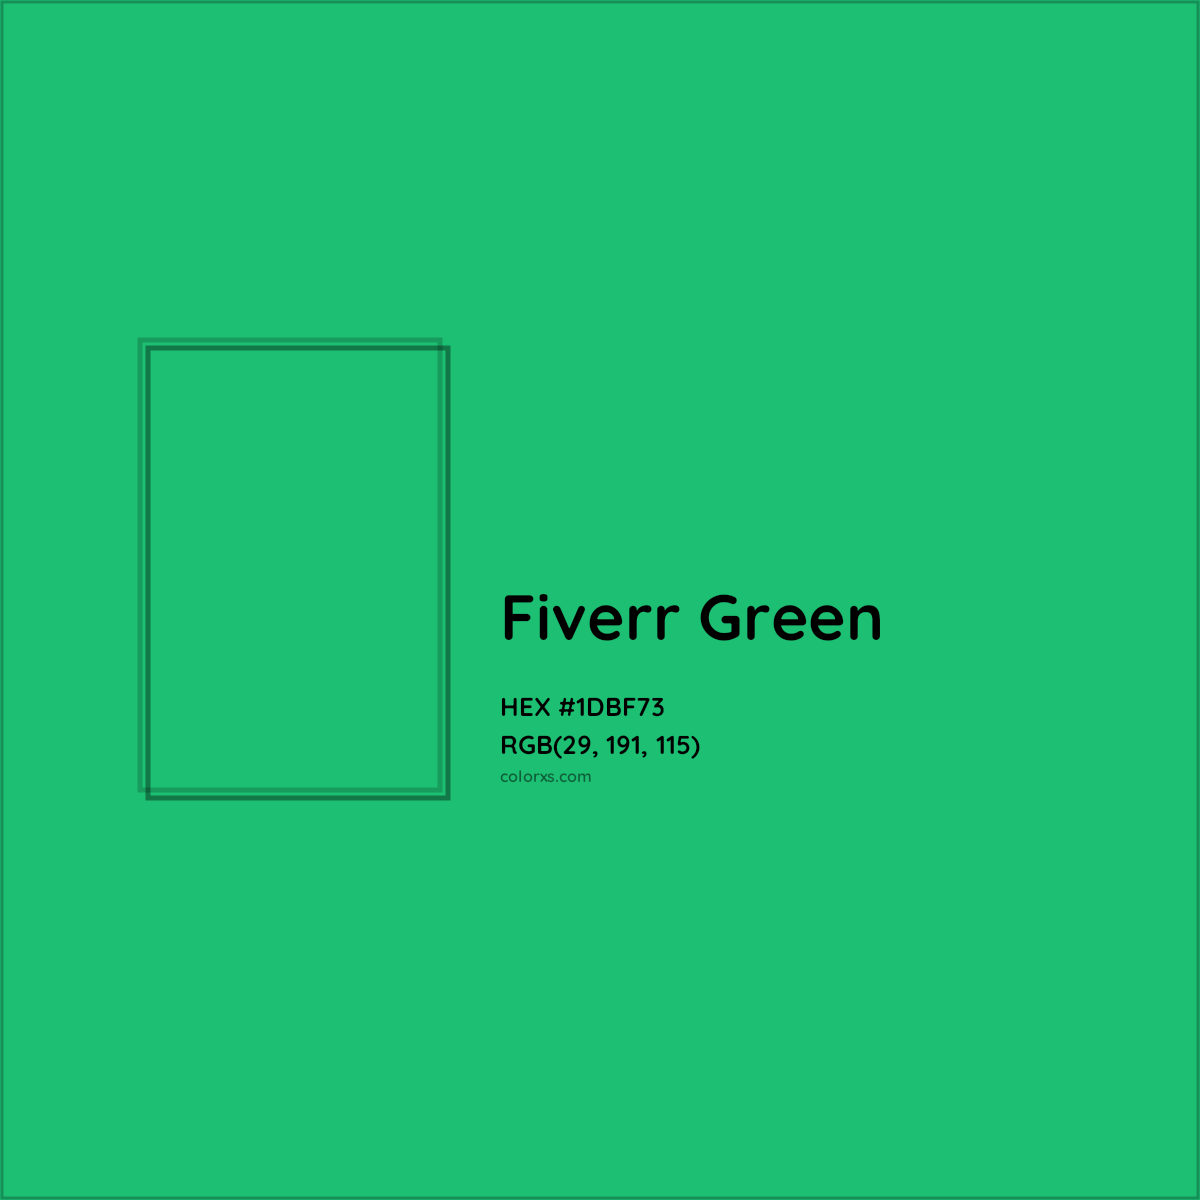 HEX #1DBF73 Fiverr Green Other Brand - Color Code